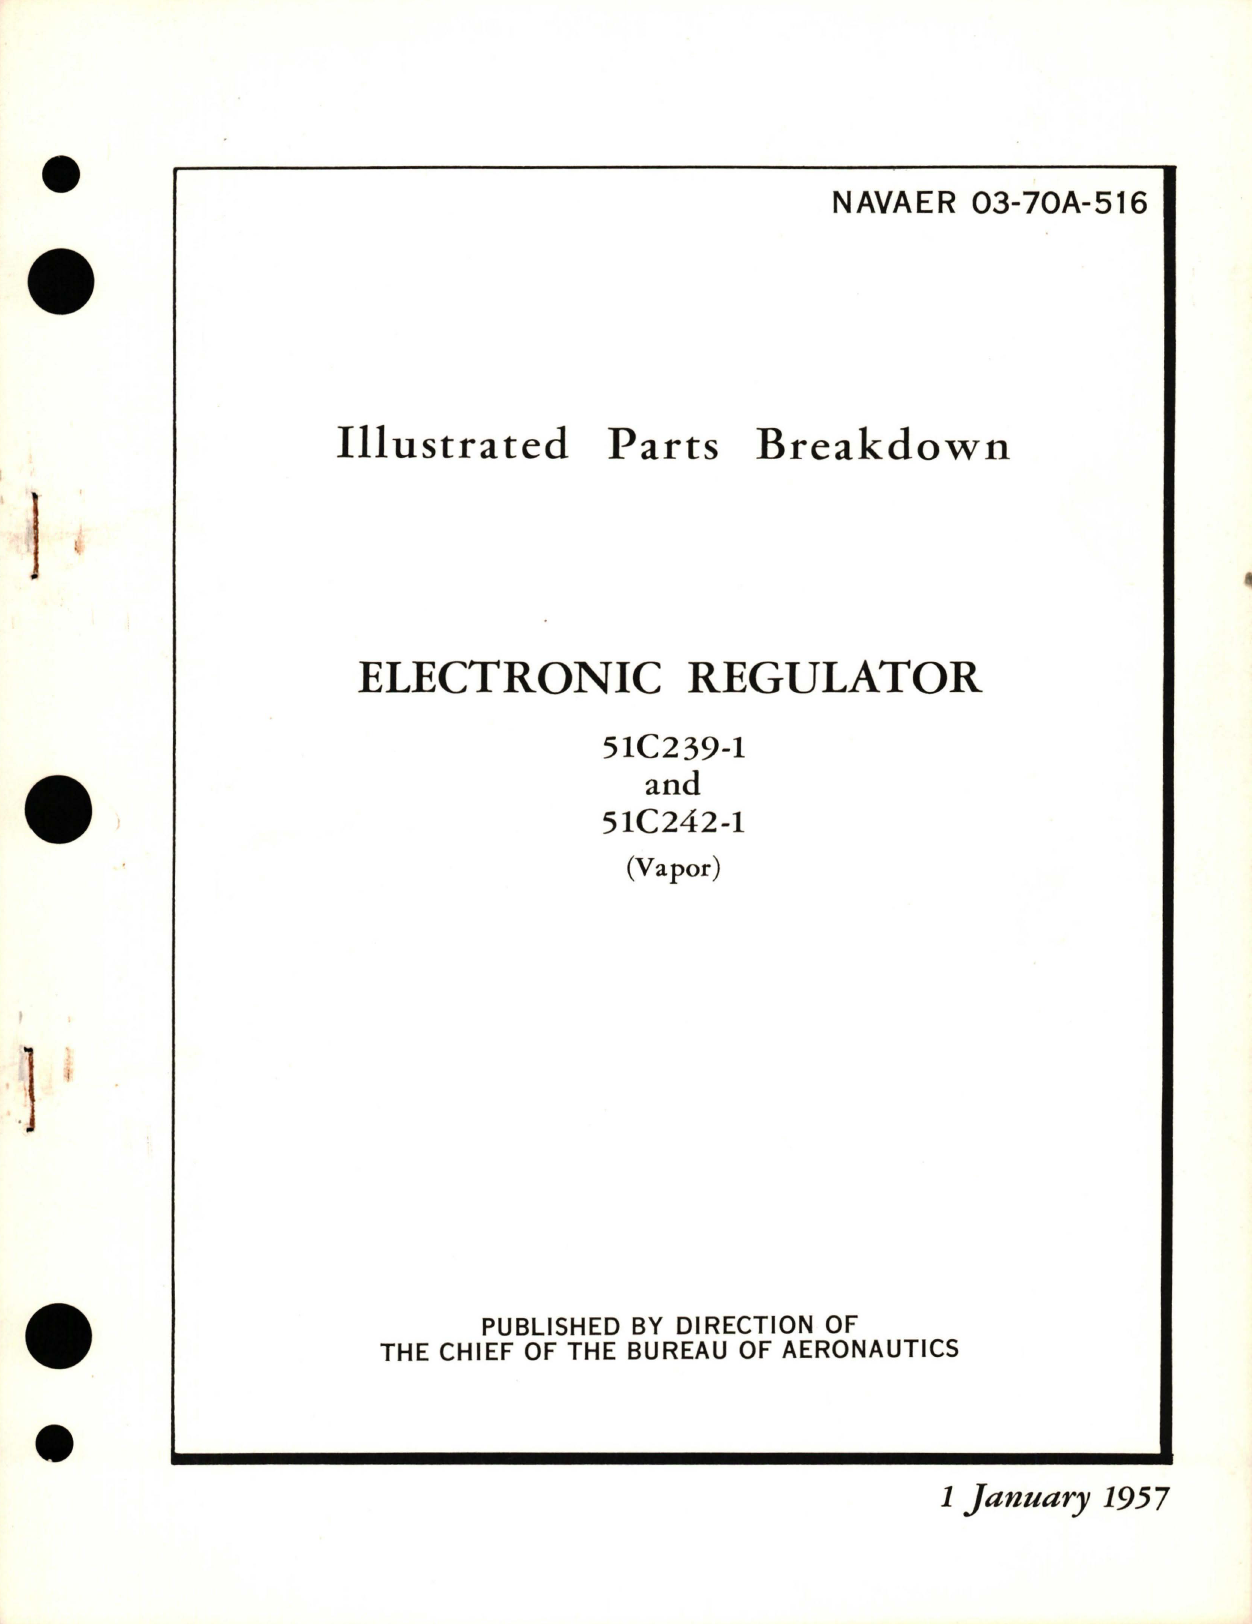 Sample page 1 from AirCorps Library document: Illustrated Parts Breakdown for Electronic Regulator - 51C239-1 and 51C242-1